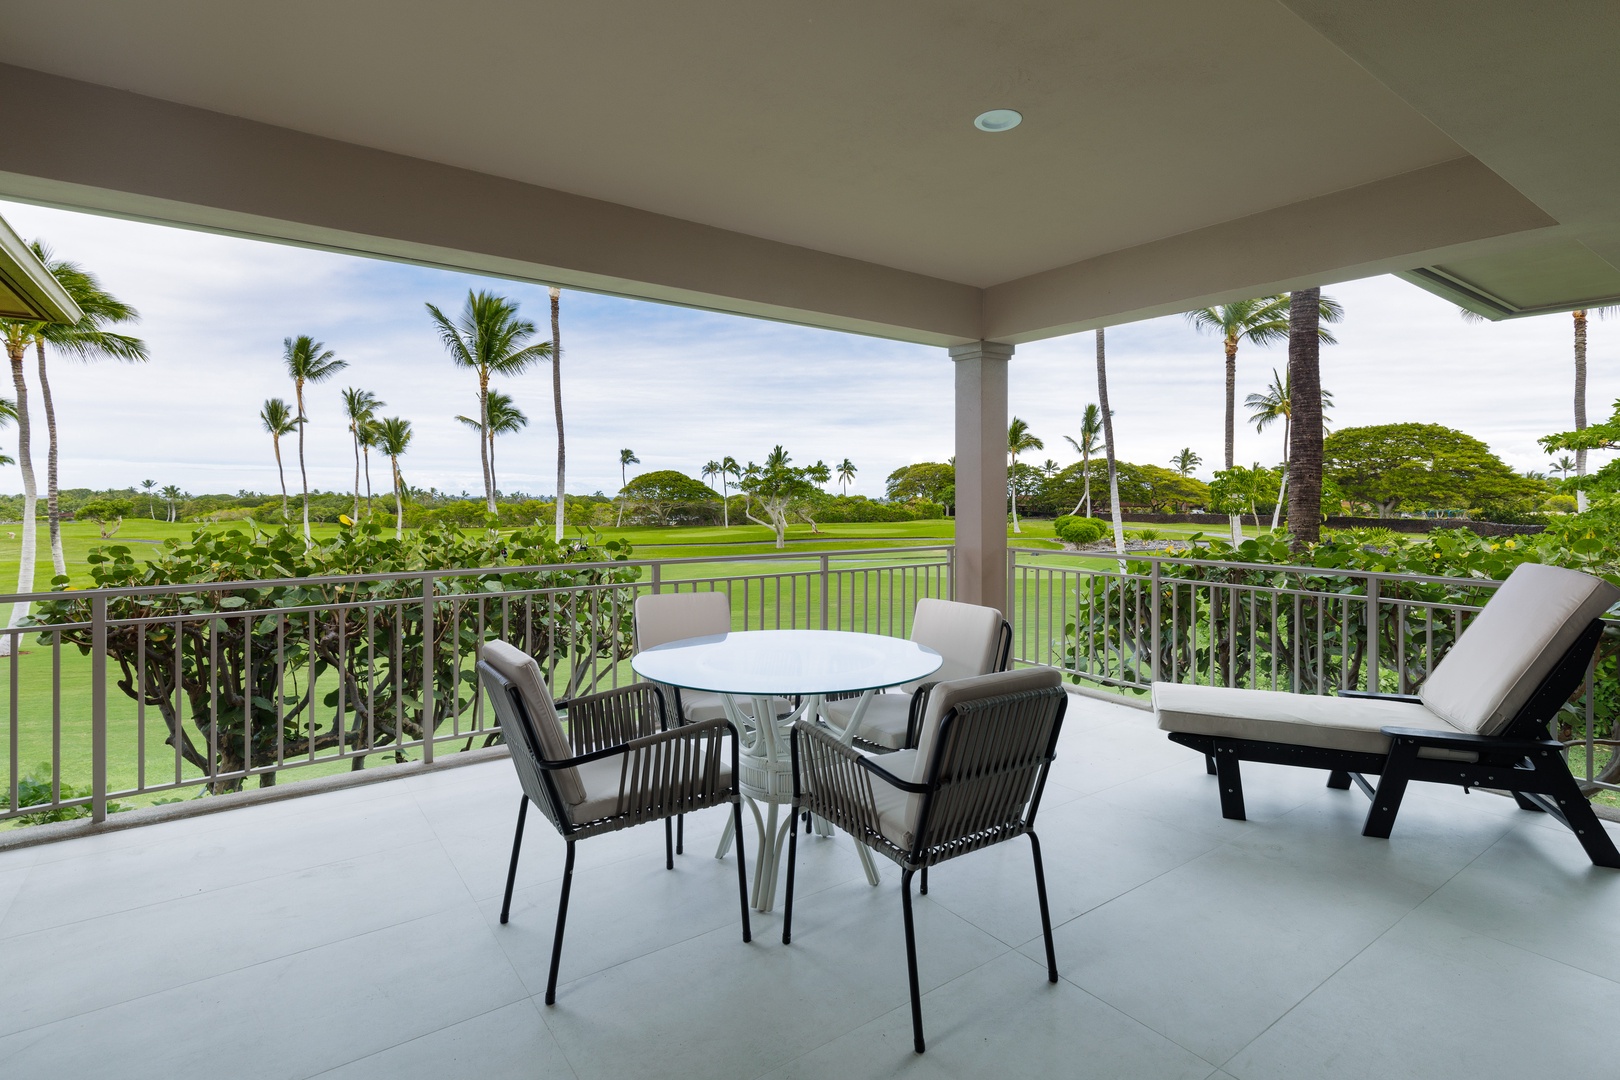 Kailua Kona Vacation Rentals, Fairway Villa 104A - Morning breeze on the lanai, a perfect spot for your morning coffees.